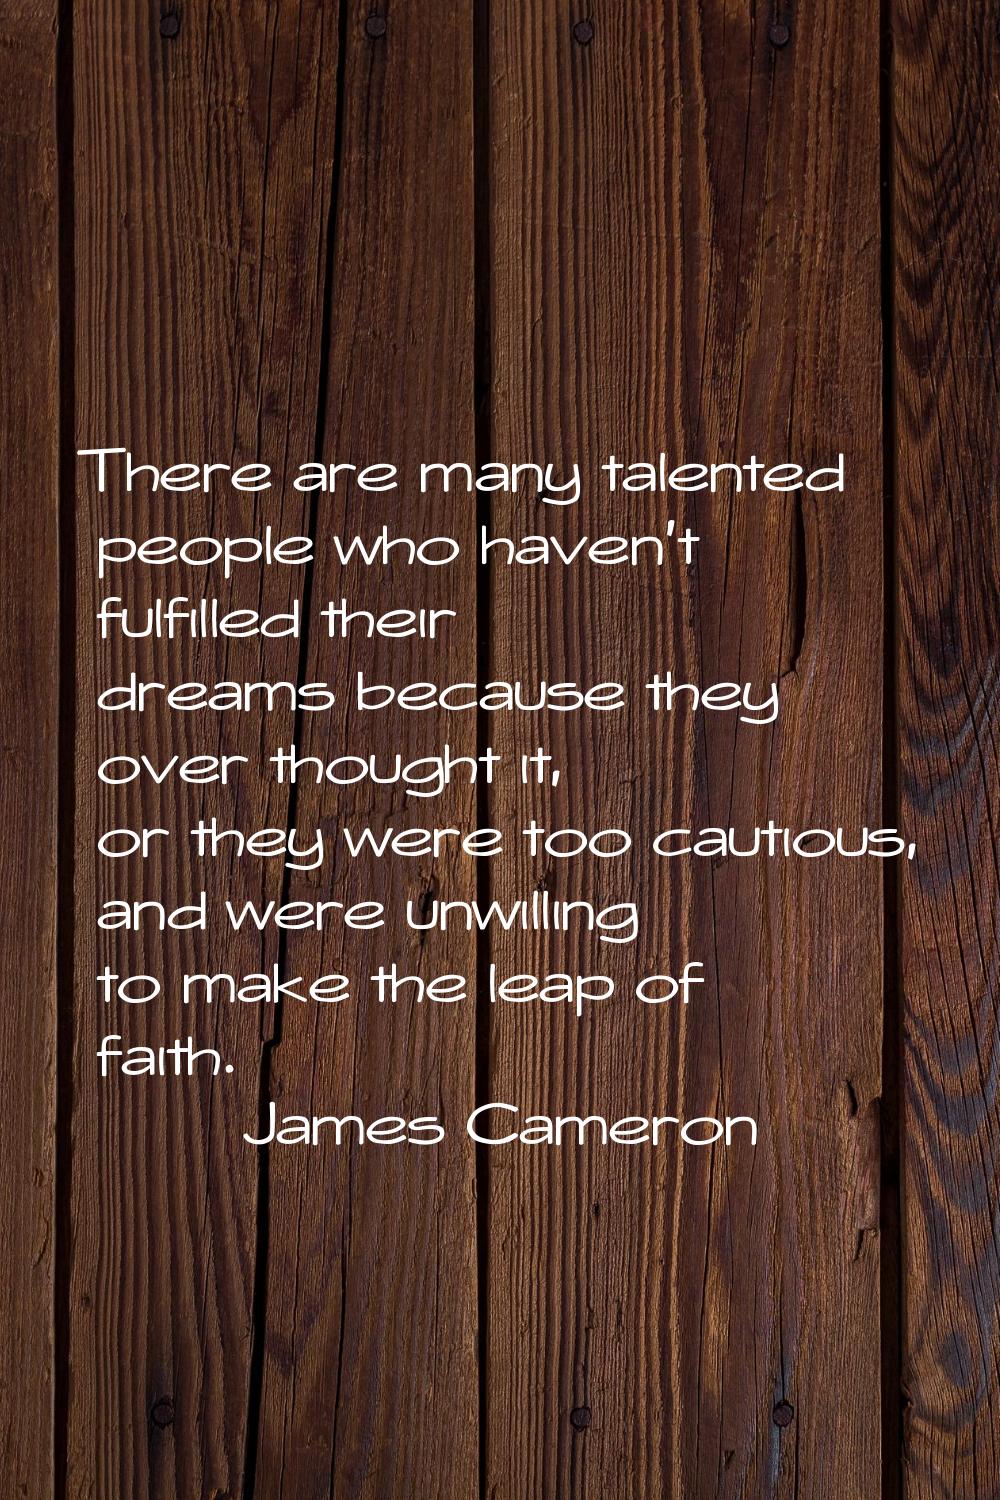 There are many talented people who haven't fulfilled their dreams because they over thought it, or 